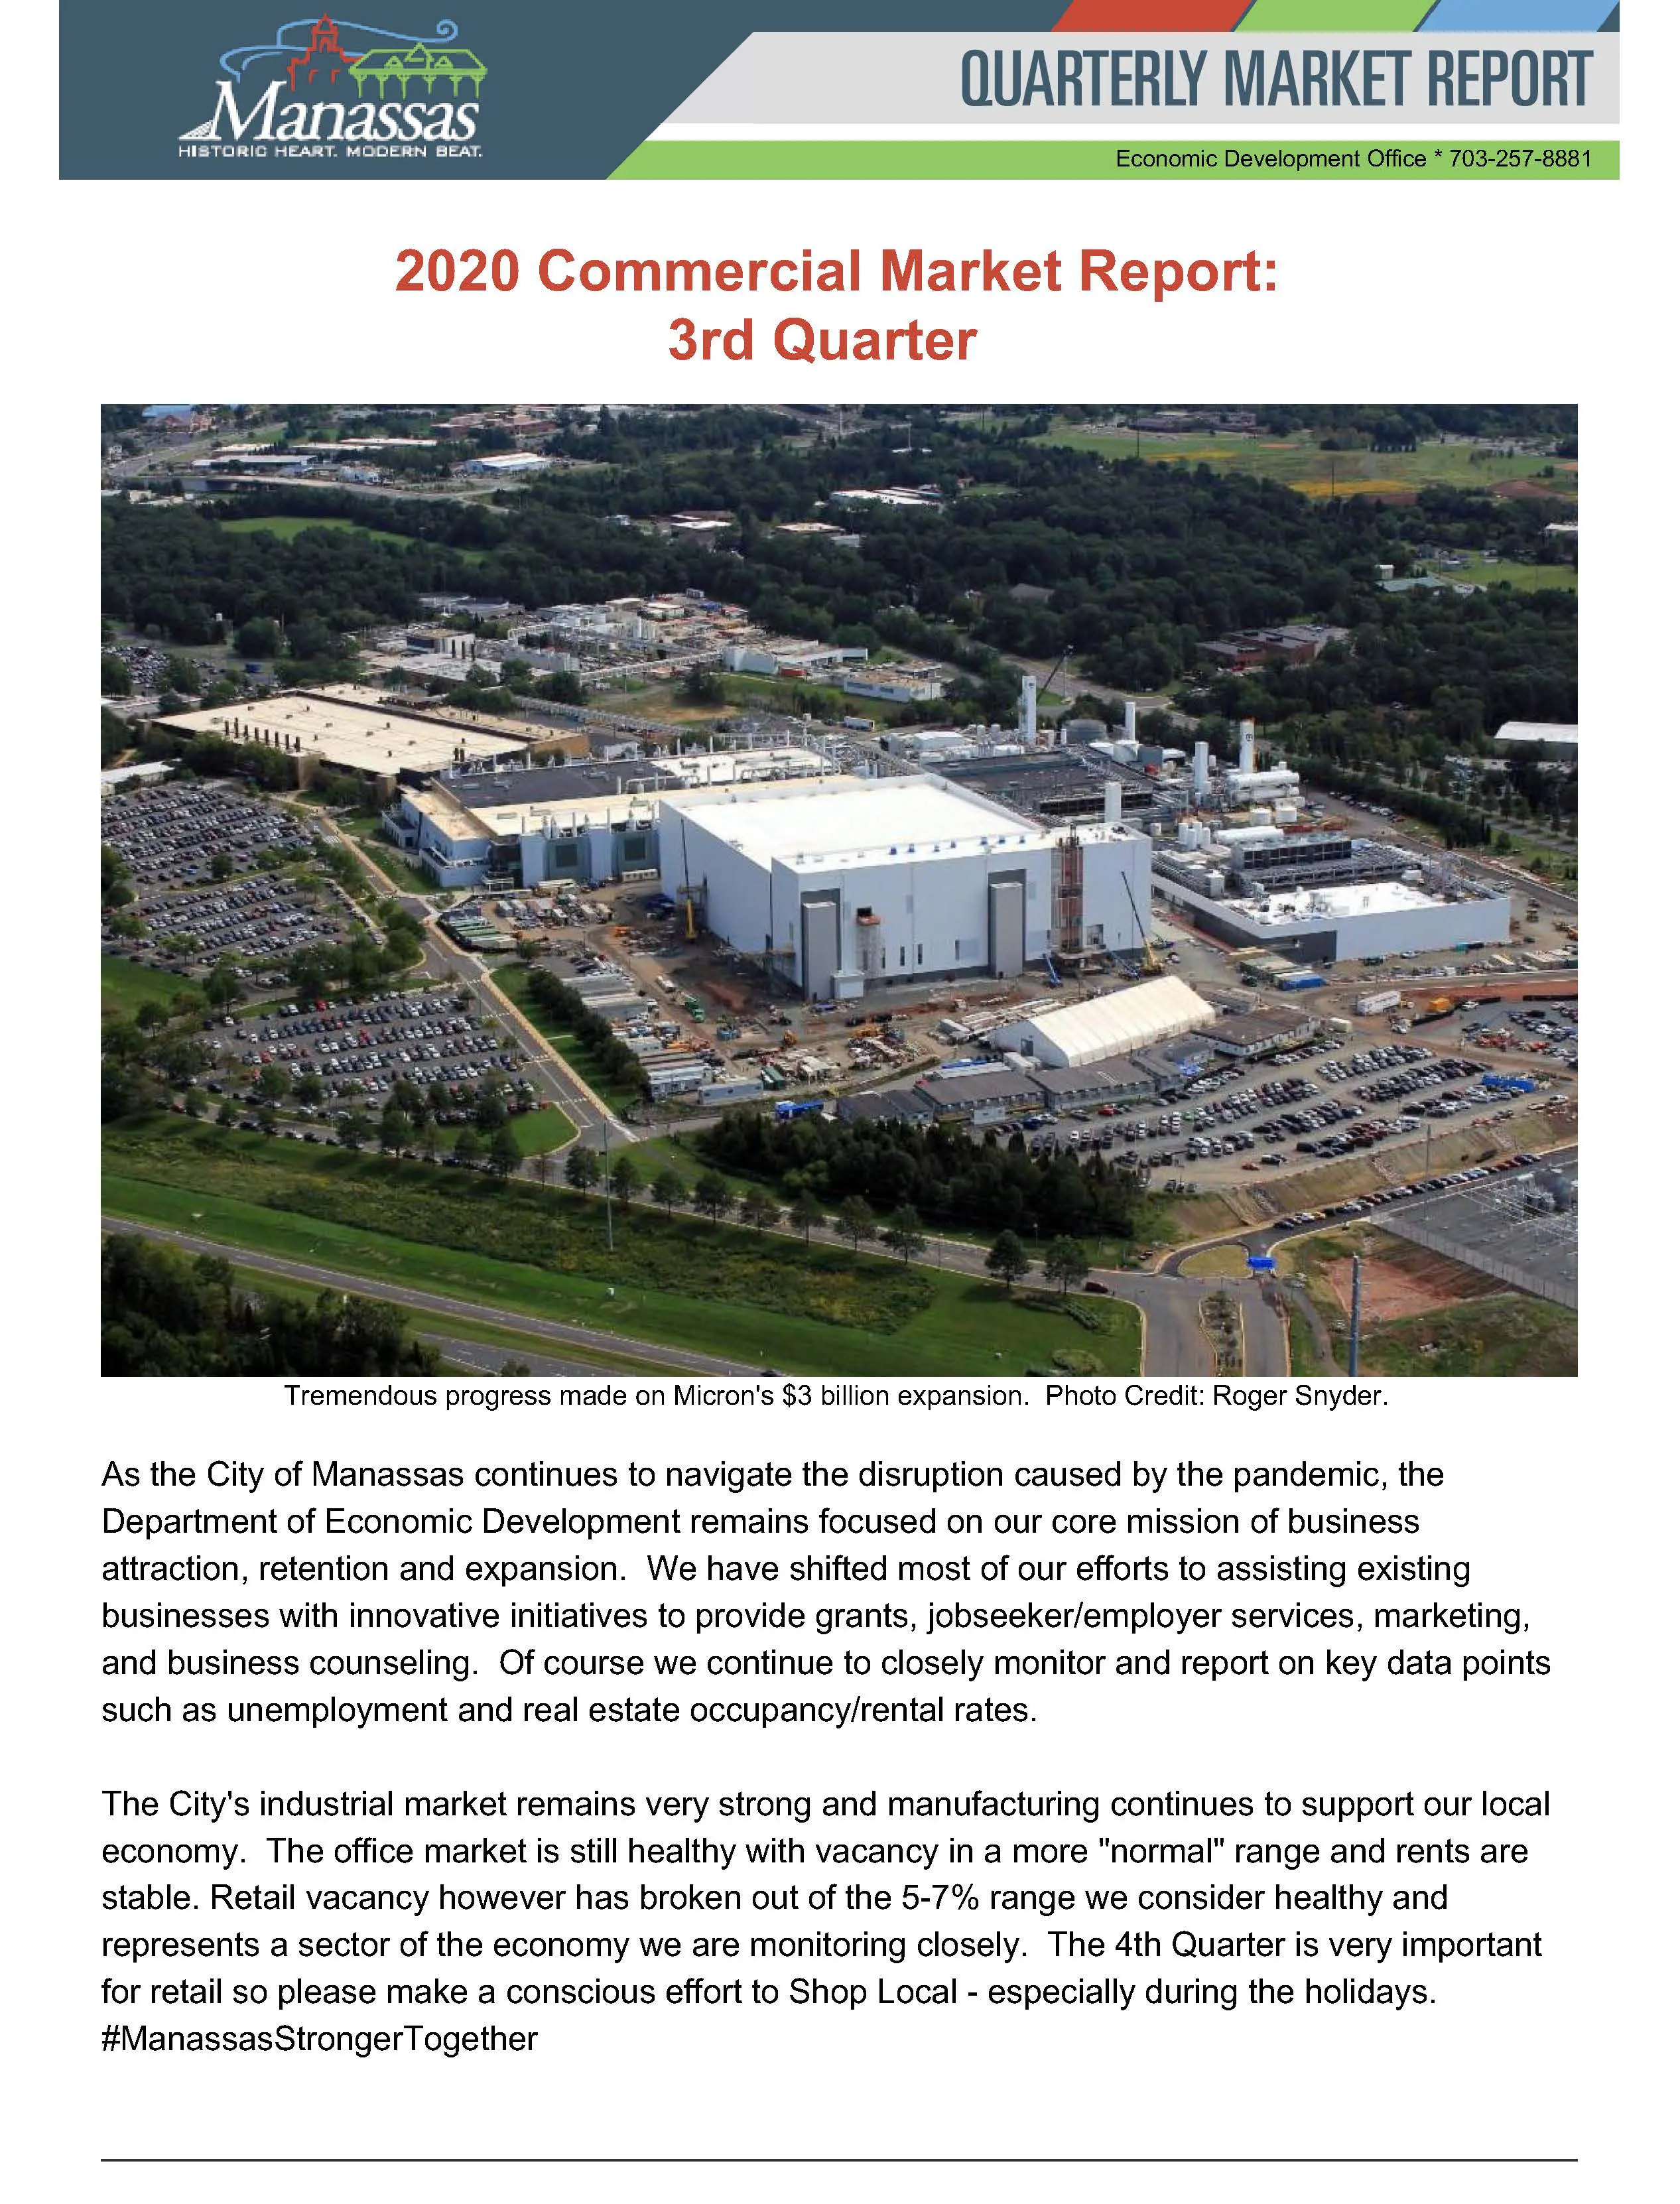 Q3-2020-Market-Report-10-15-20_Page_1-scaled Reports & Resources